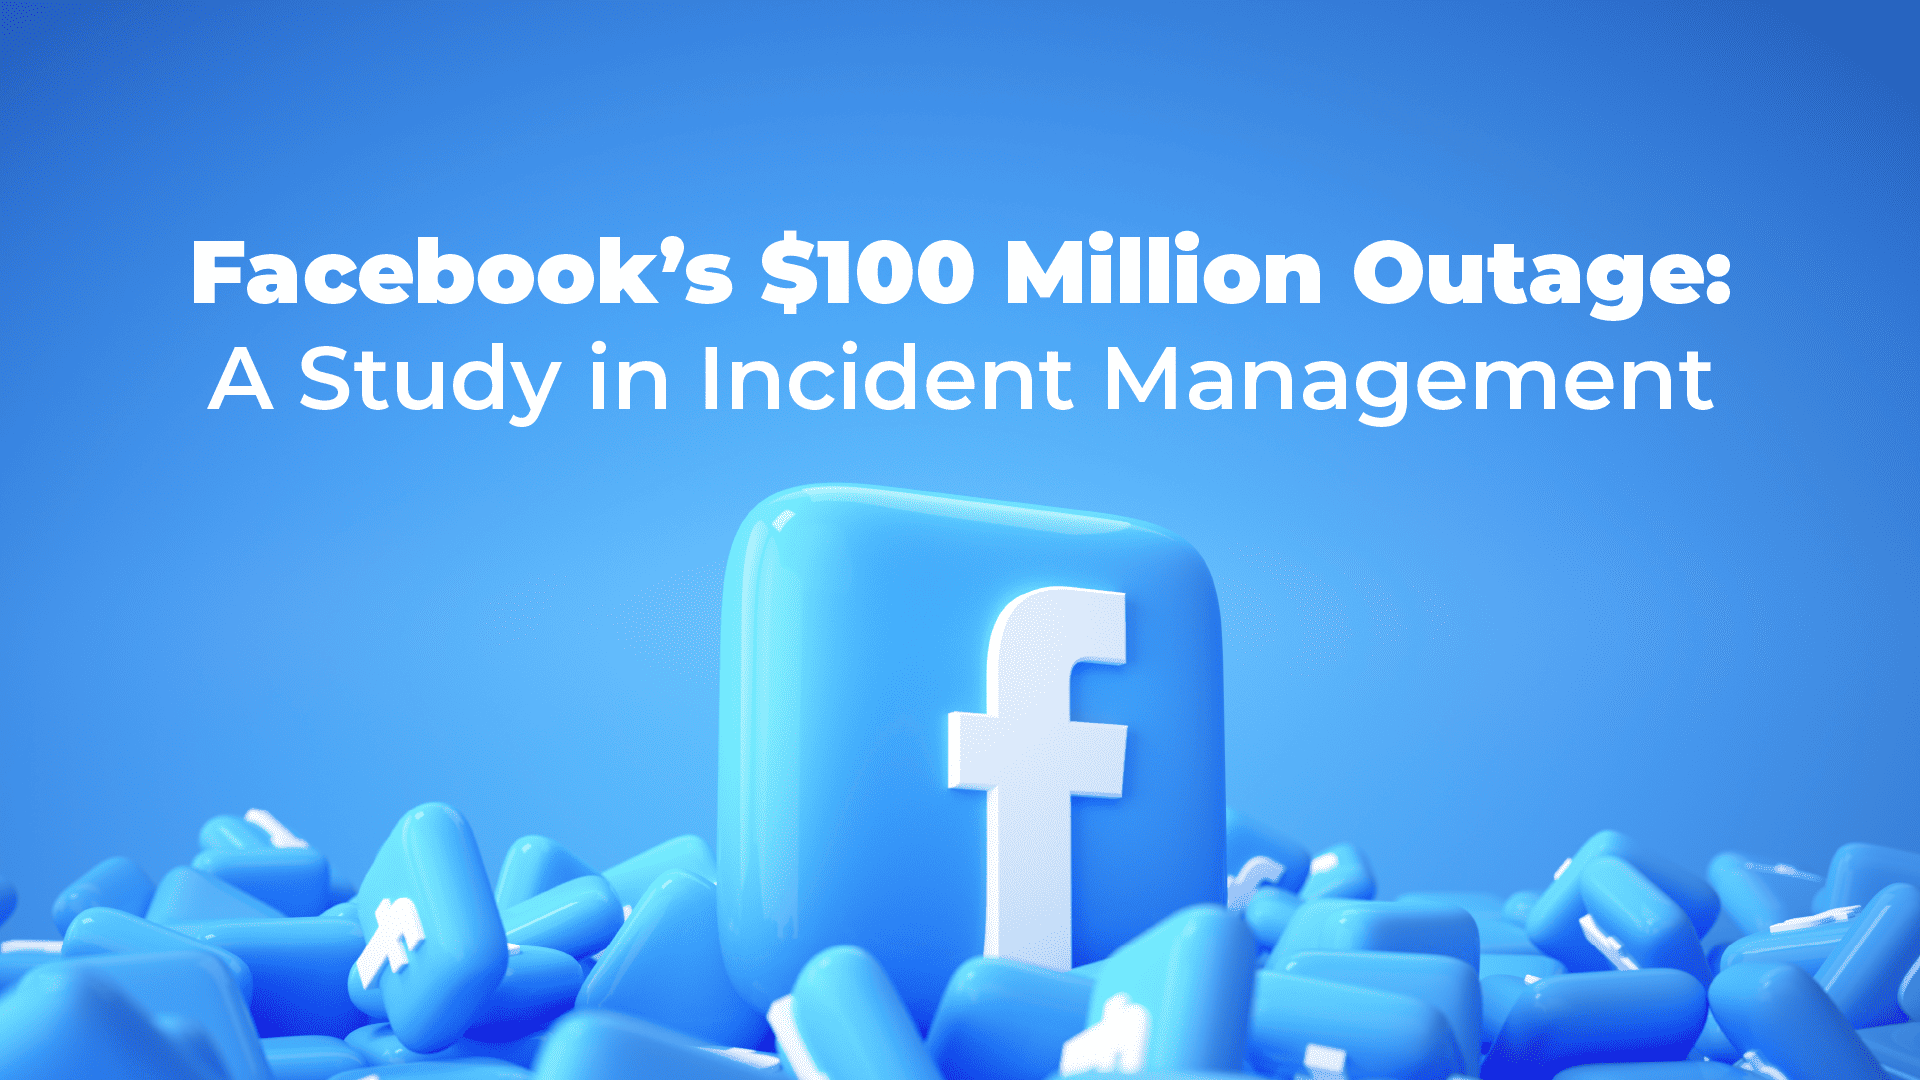 Facebook’s $100 Million Outage: A Study in Incident Management